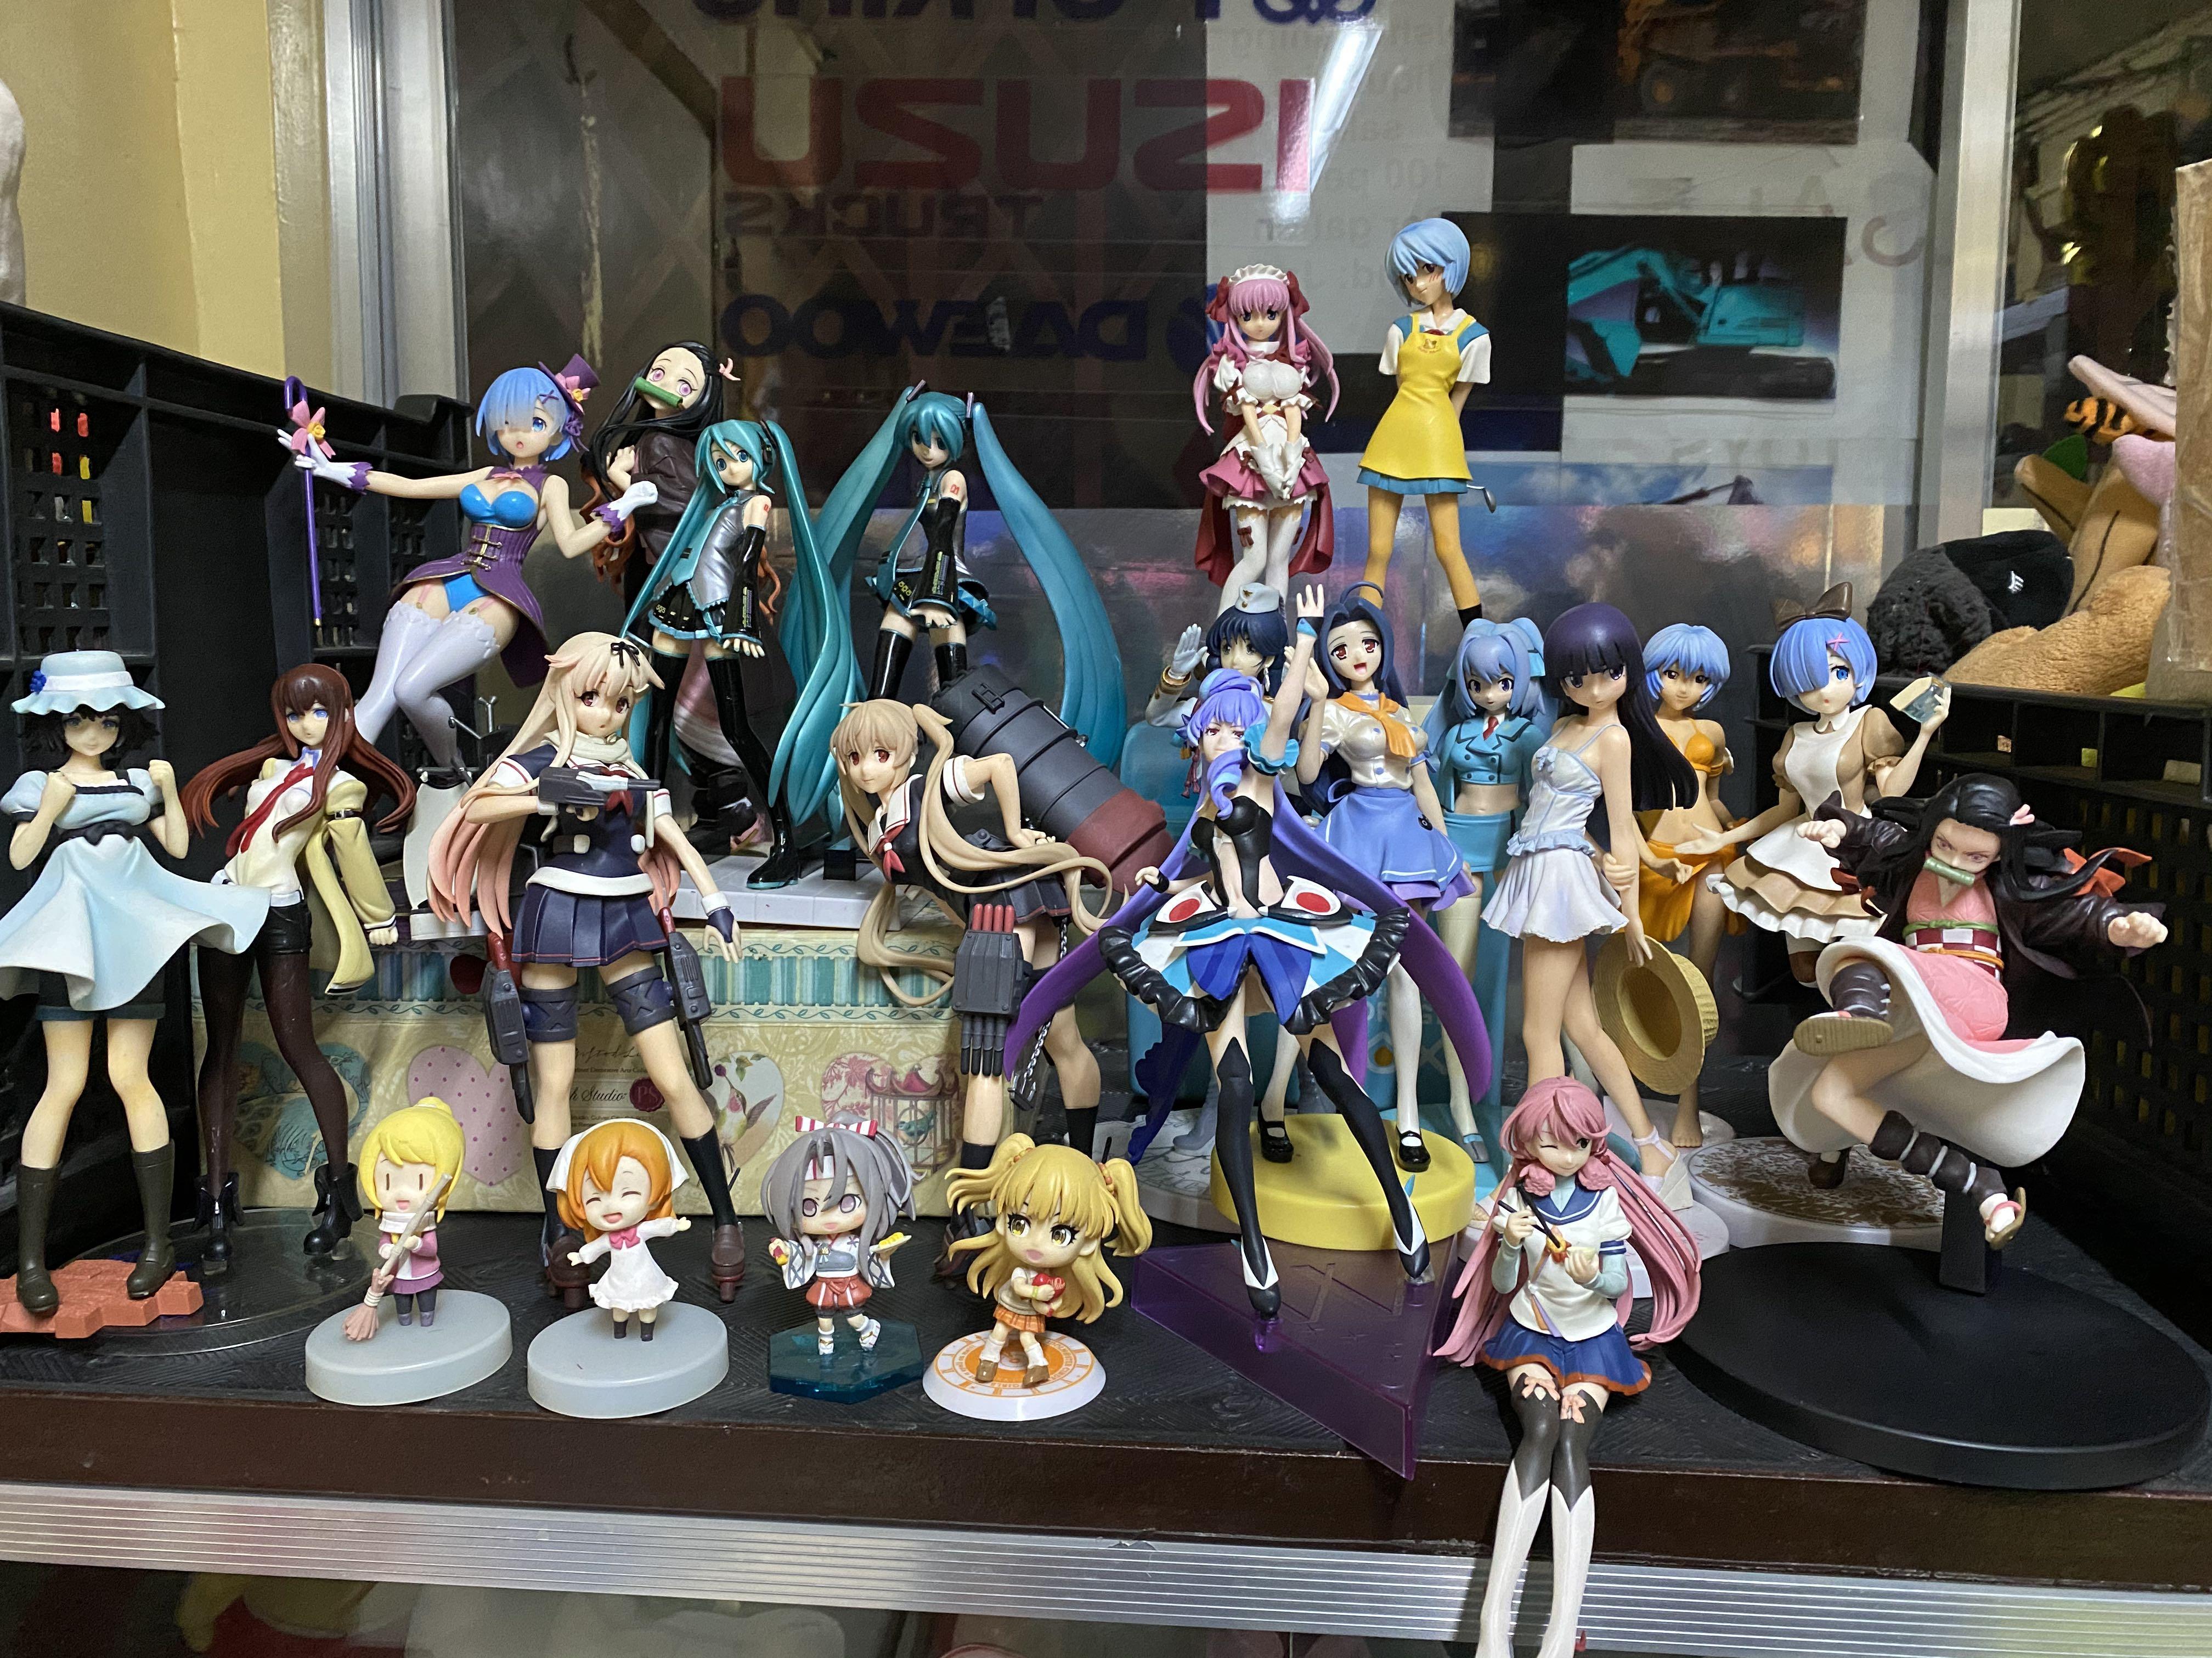 All About Anime Figurines. The reasons behind collecting figures